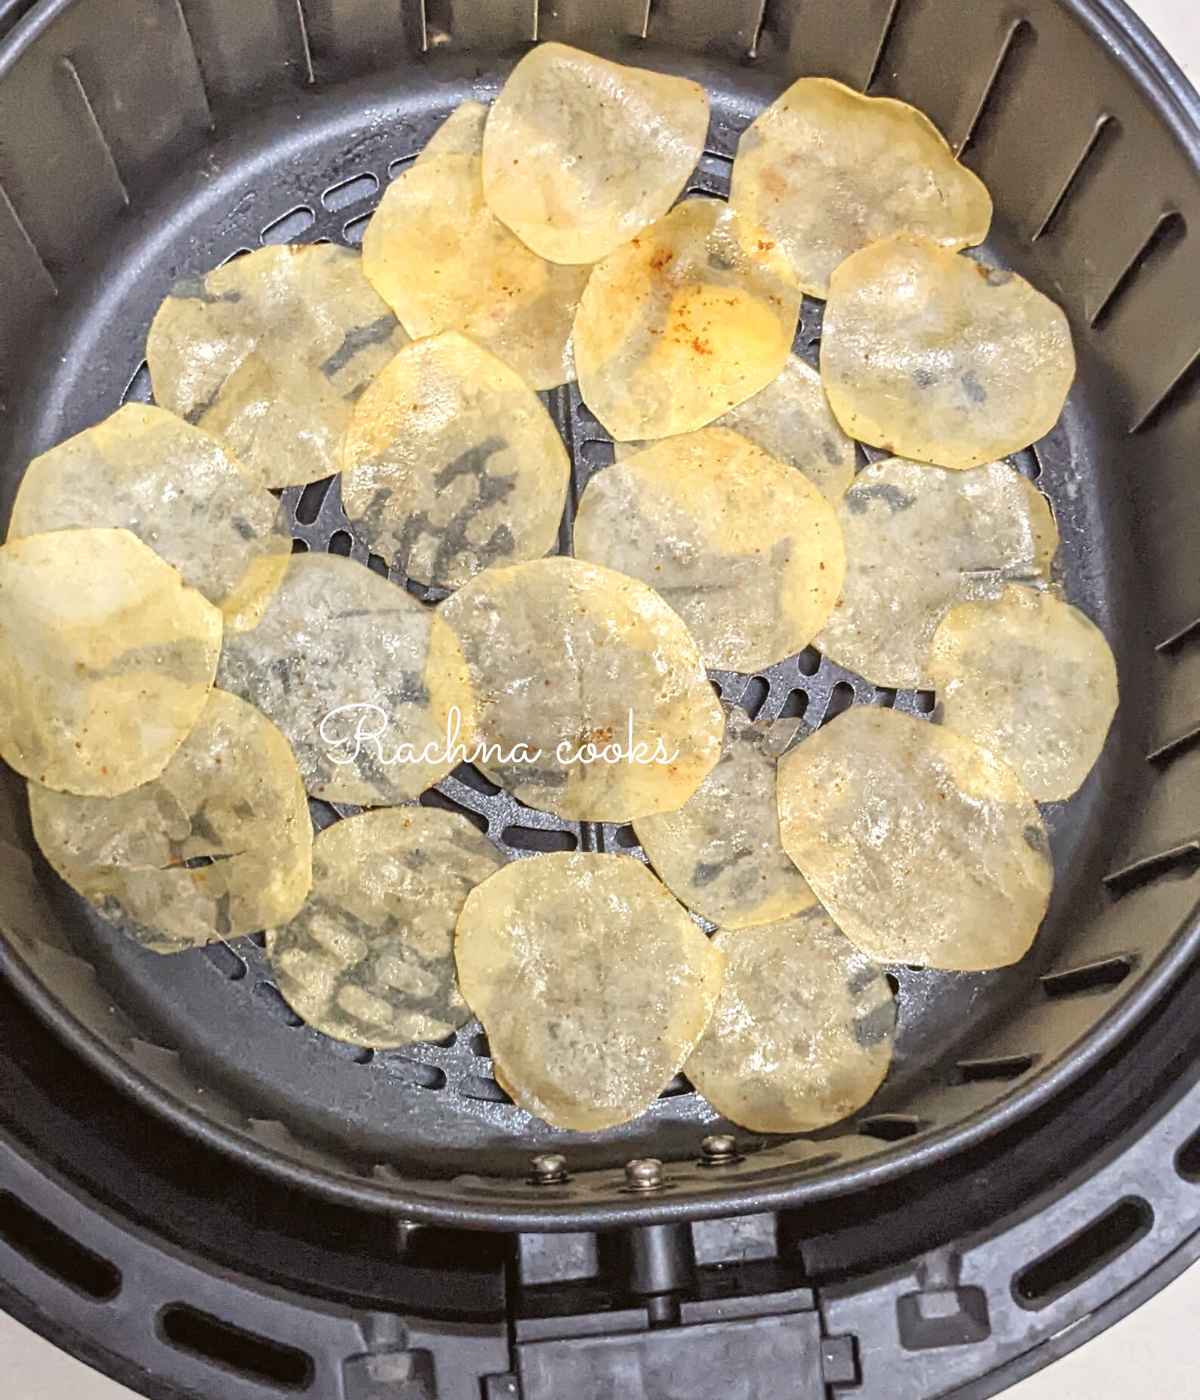 Seasoned potato slices spread out in air fryer basket ready for air frying.